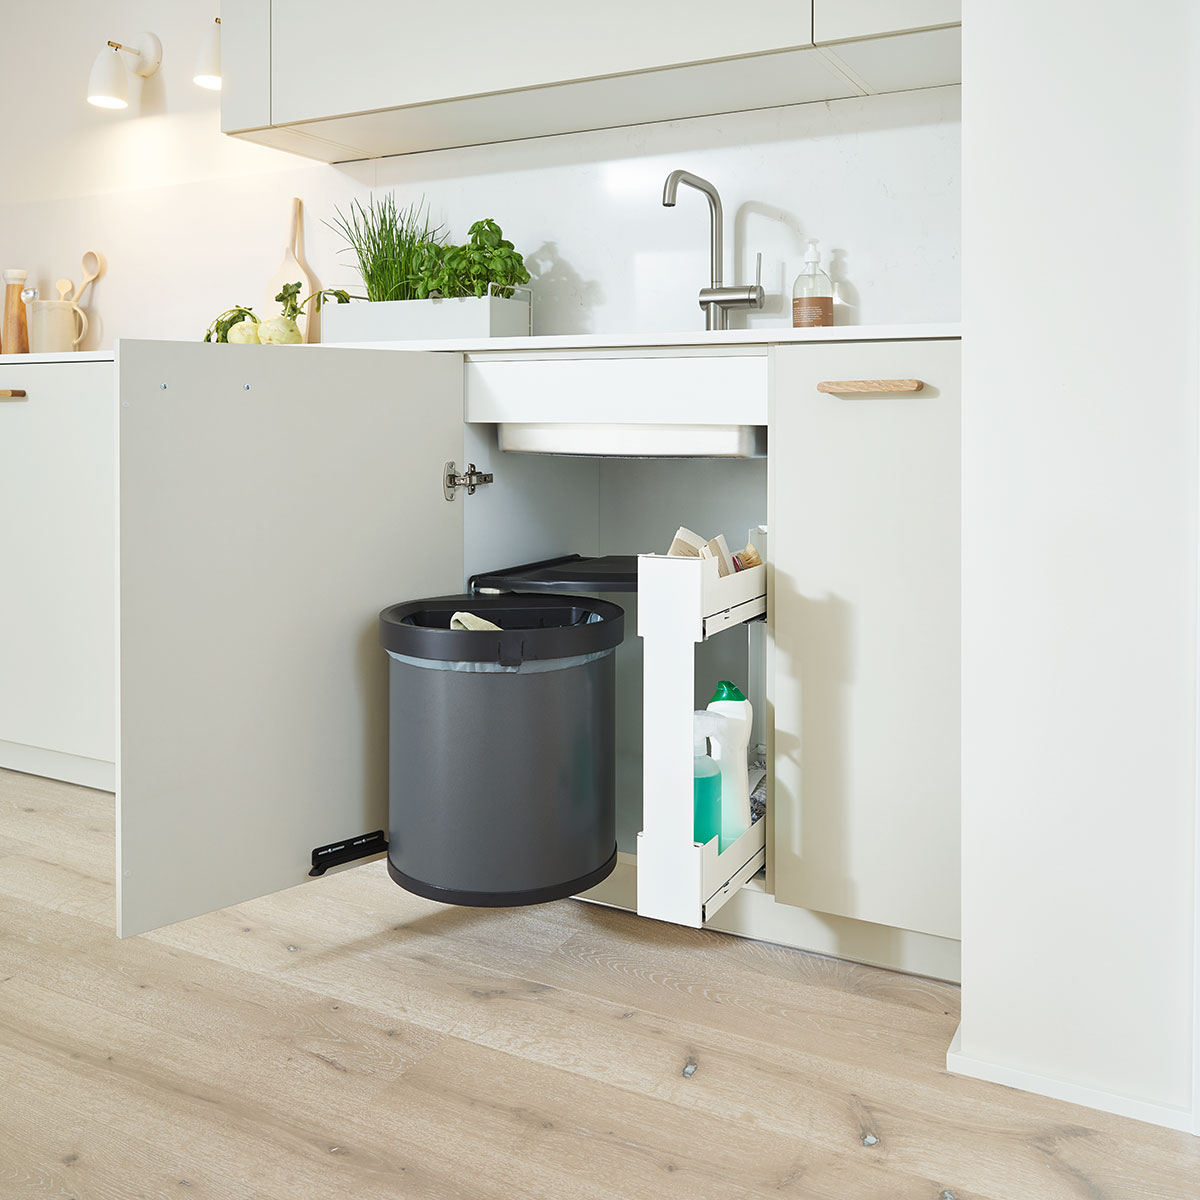 How to Plan Waste Management into Your Client's Kitchen – VESTABUL